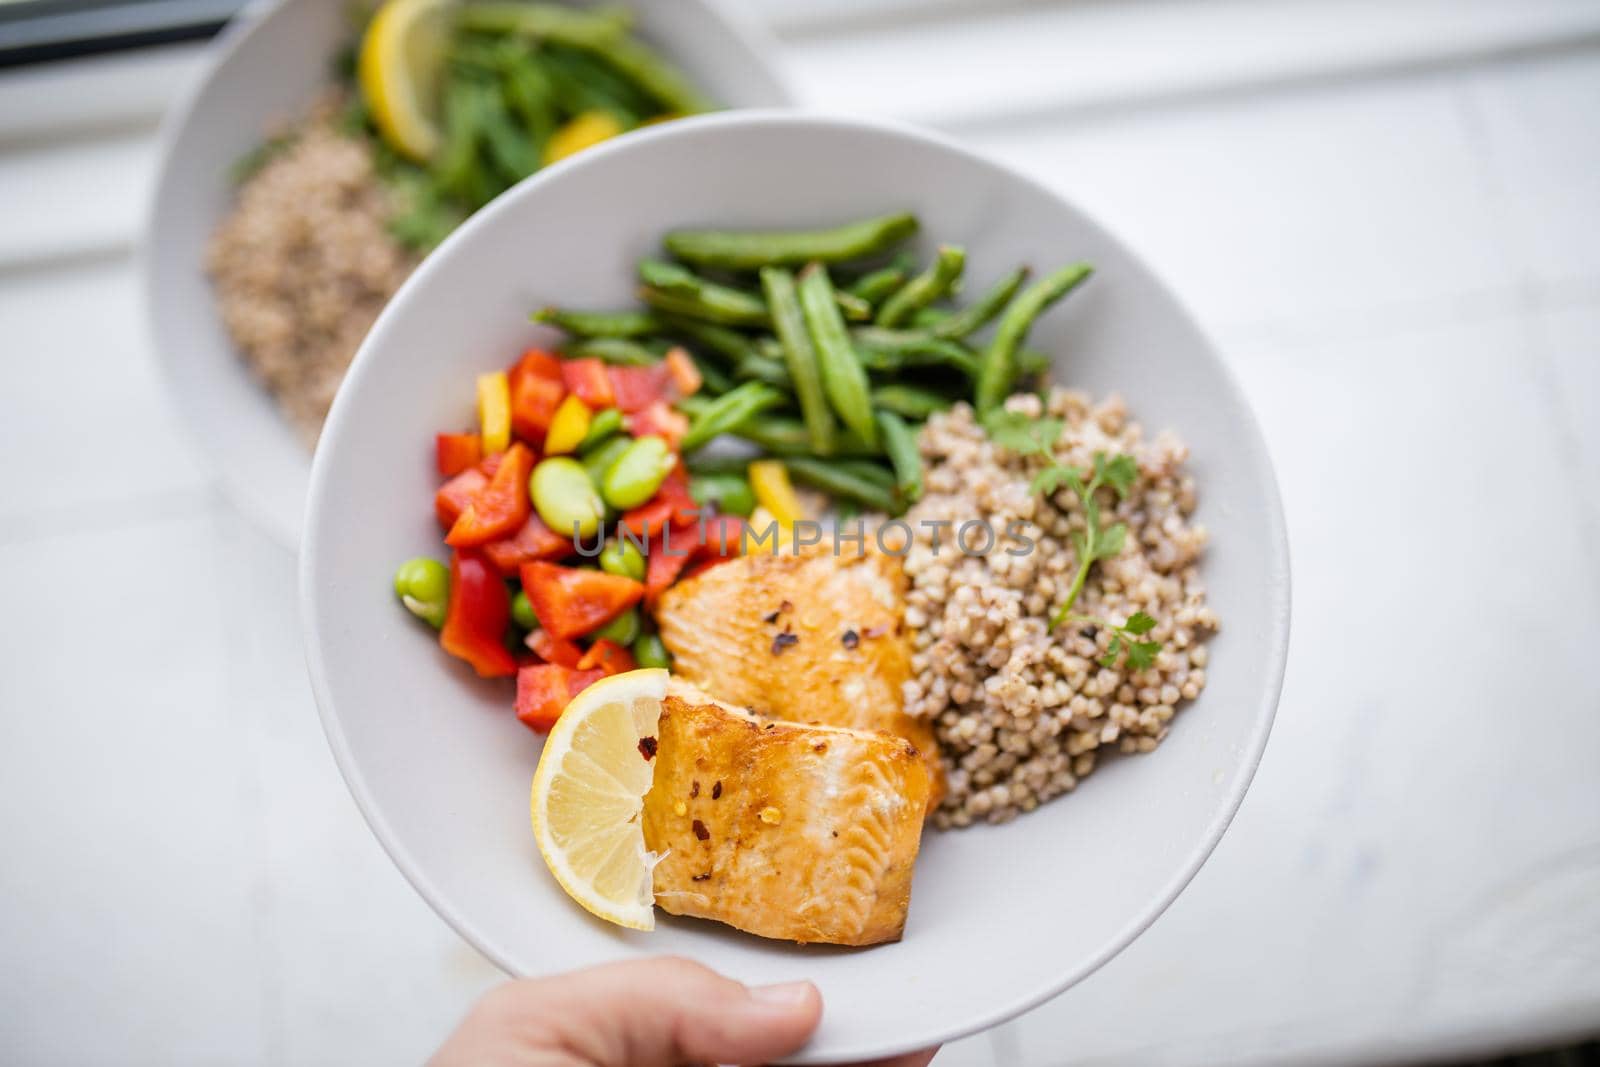 Hand holding salmon and buckwheat dish with green beans, broad beans, and tomato slices. Nutritious dish with vegetables and fish on white plate. Healthy balanced diet